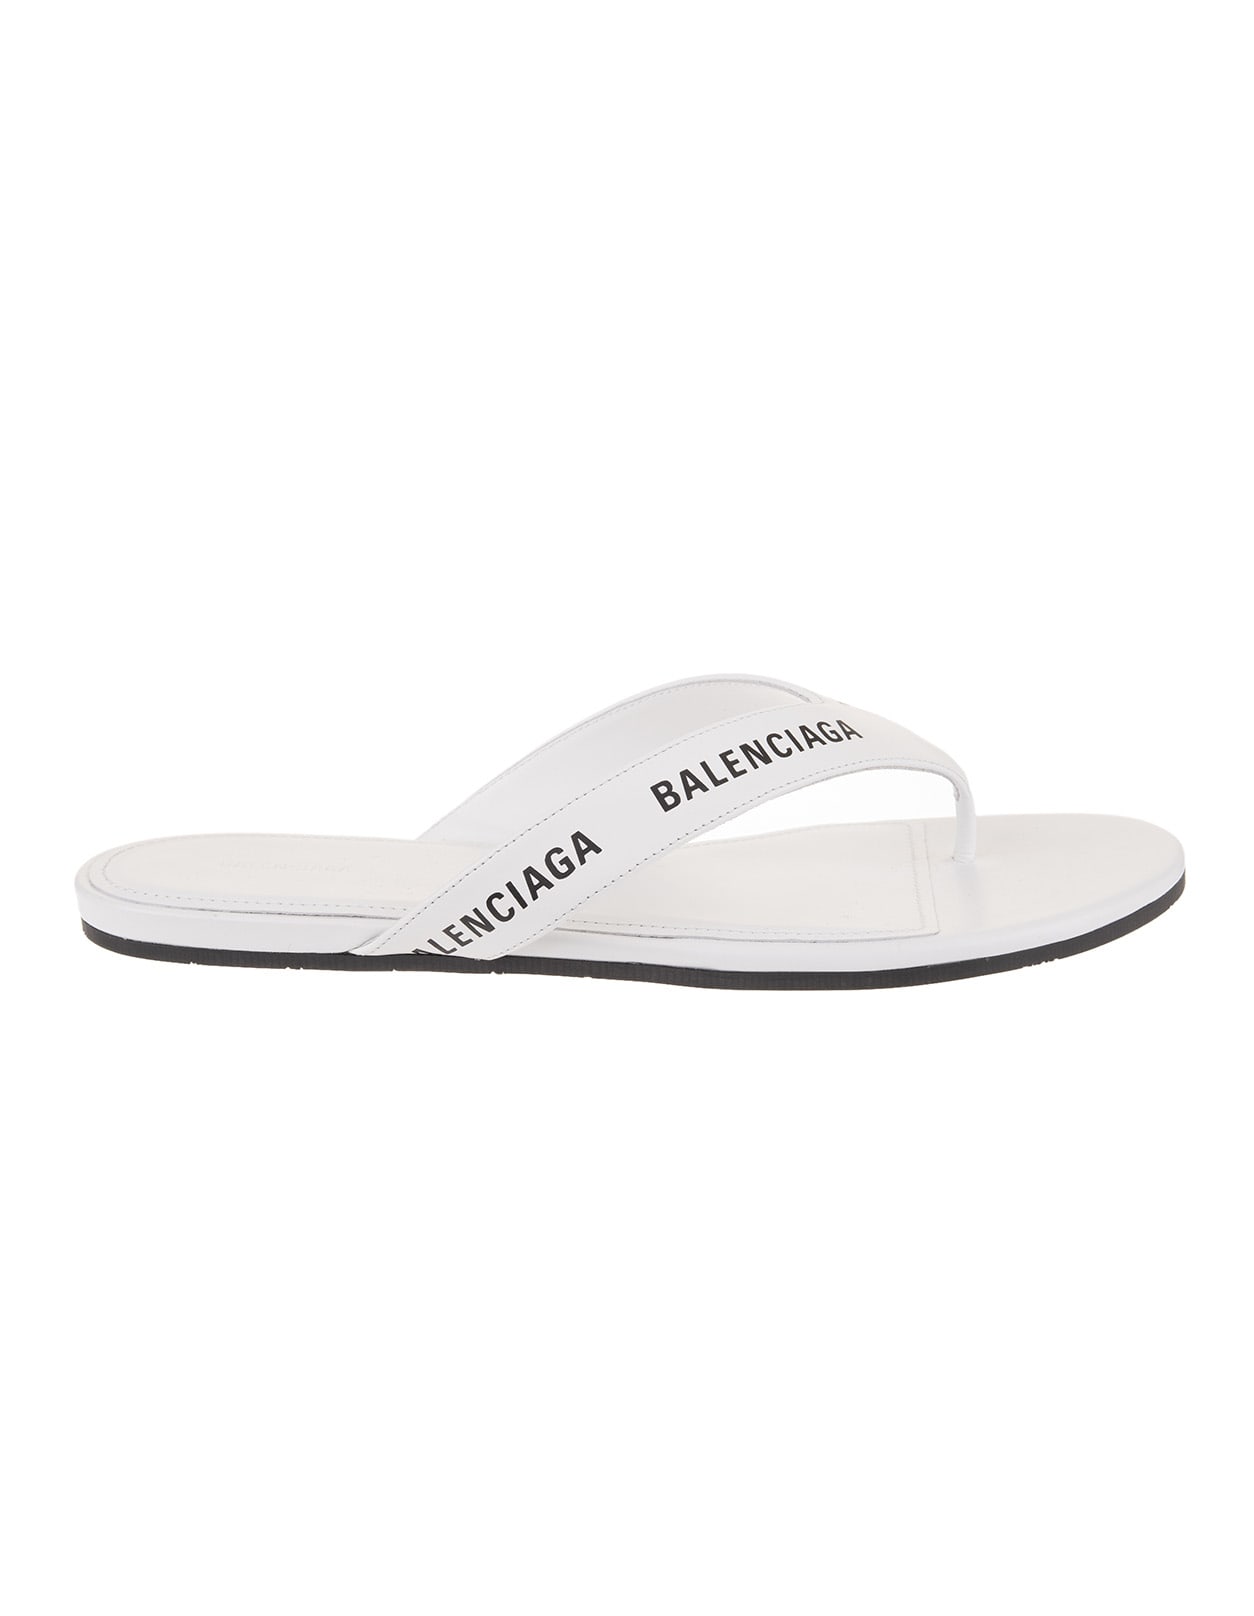 Buy Balenciaga Woman Flip Flops With Logo In White Leather online, shop Balenciaga shoes with free shipping